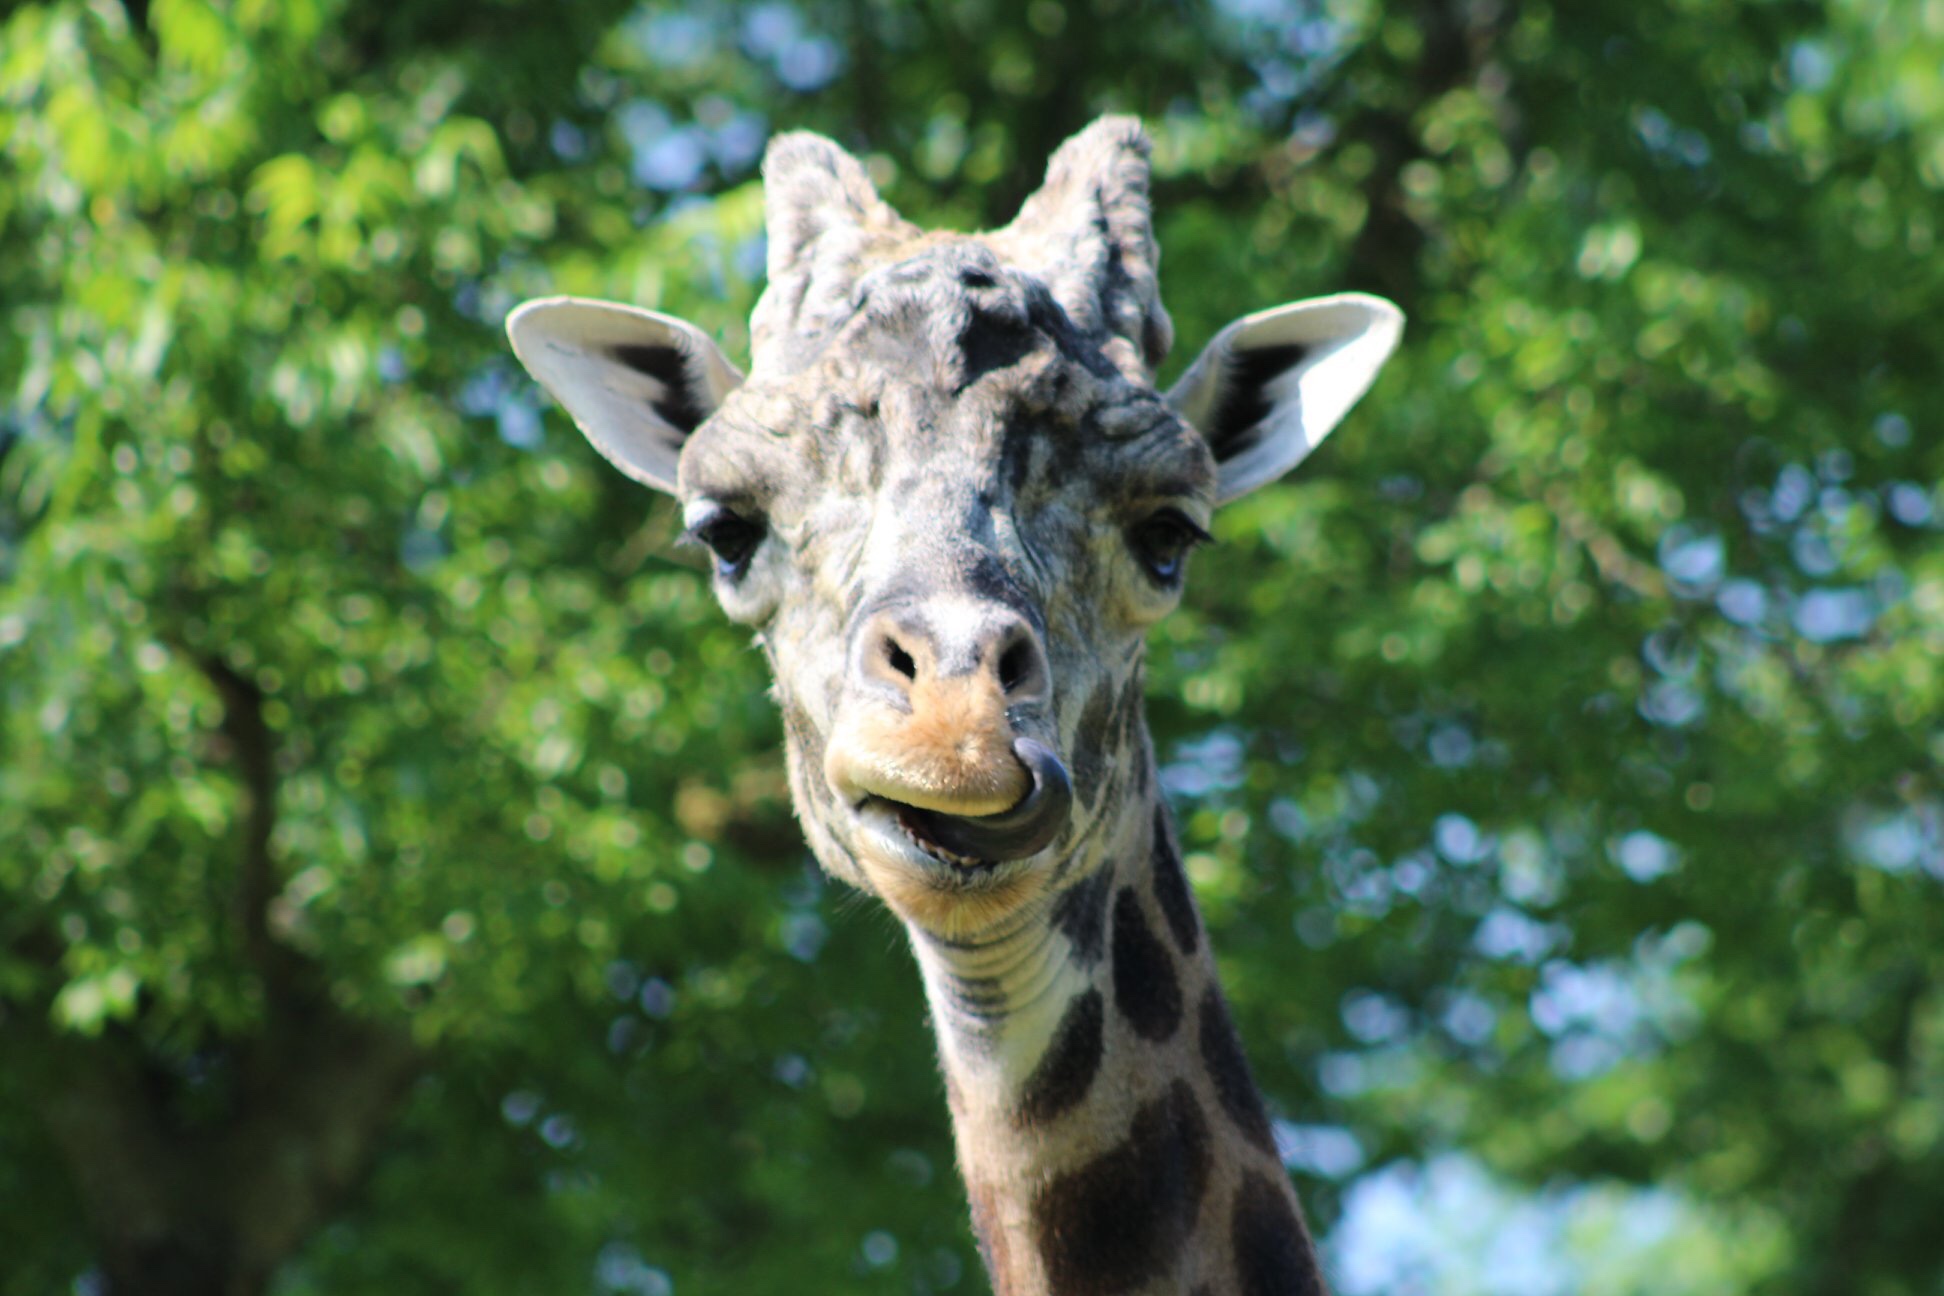 Perfect Itinerary for 2 Days in Nashville - Giraffe sticking his tongue out at the zoo